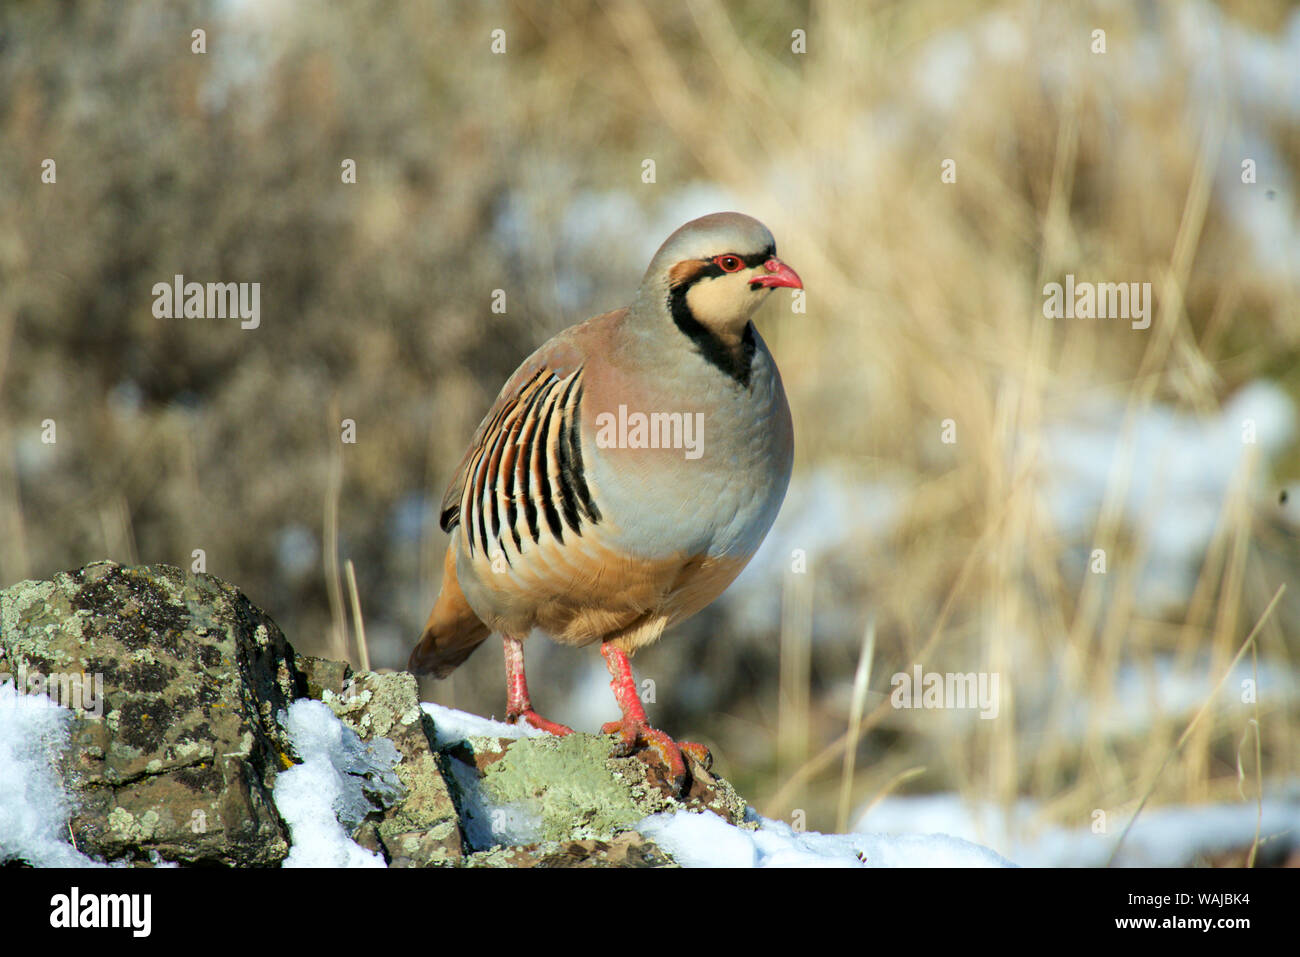 Native of southern Eurasia, the Chukar Partridge was introduced to North America as a game bird. A handsome little cinnamon and gray partridge with striking stripes along its sides and a bright red bill and feet. Stock Photo